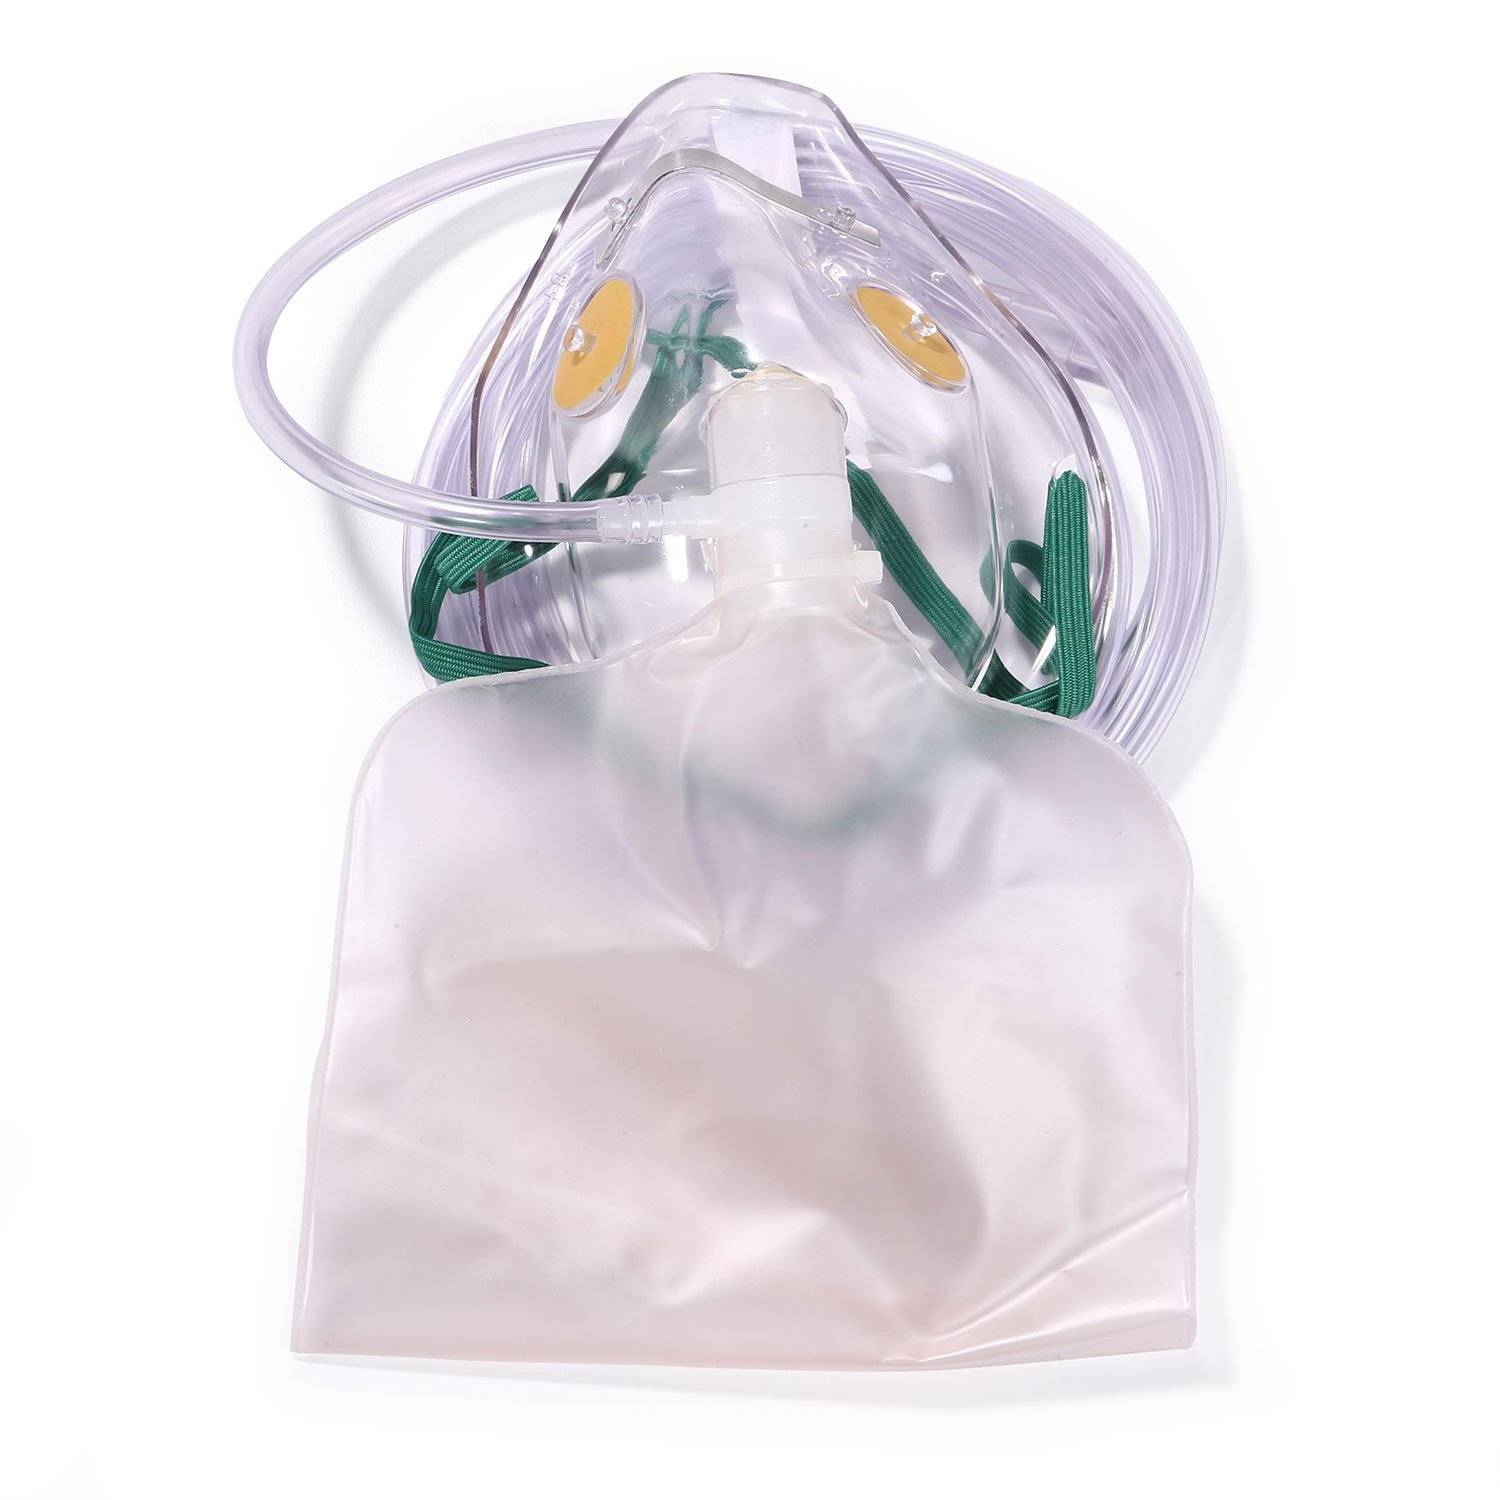 Allied Healthcare Products Adult Two Vent Non Rebreather Mas